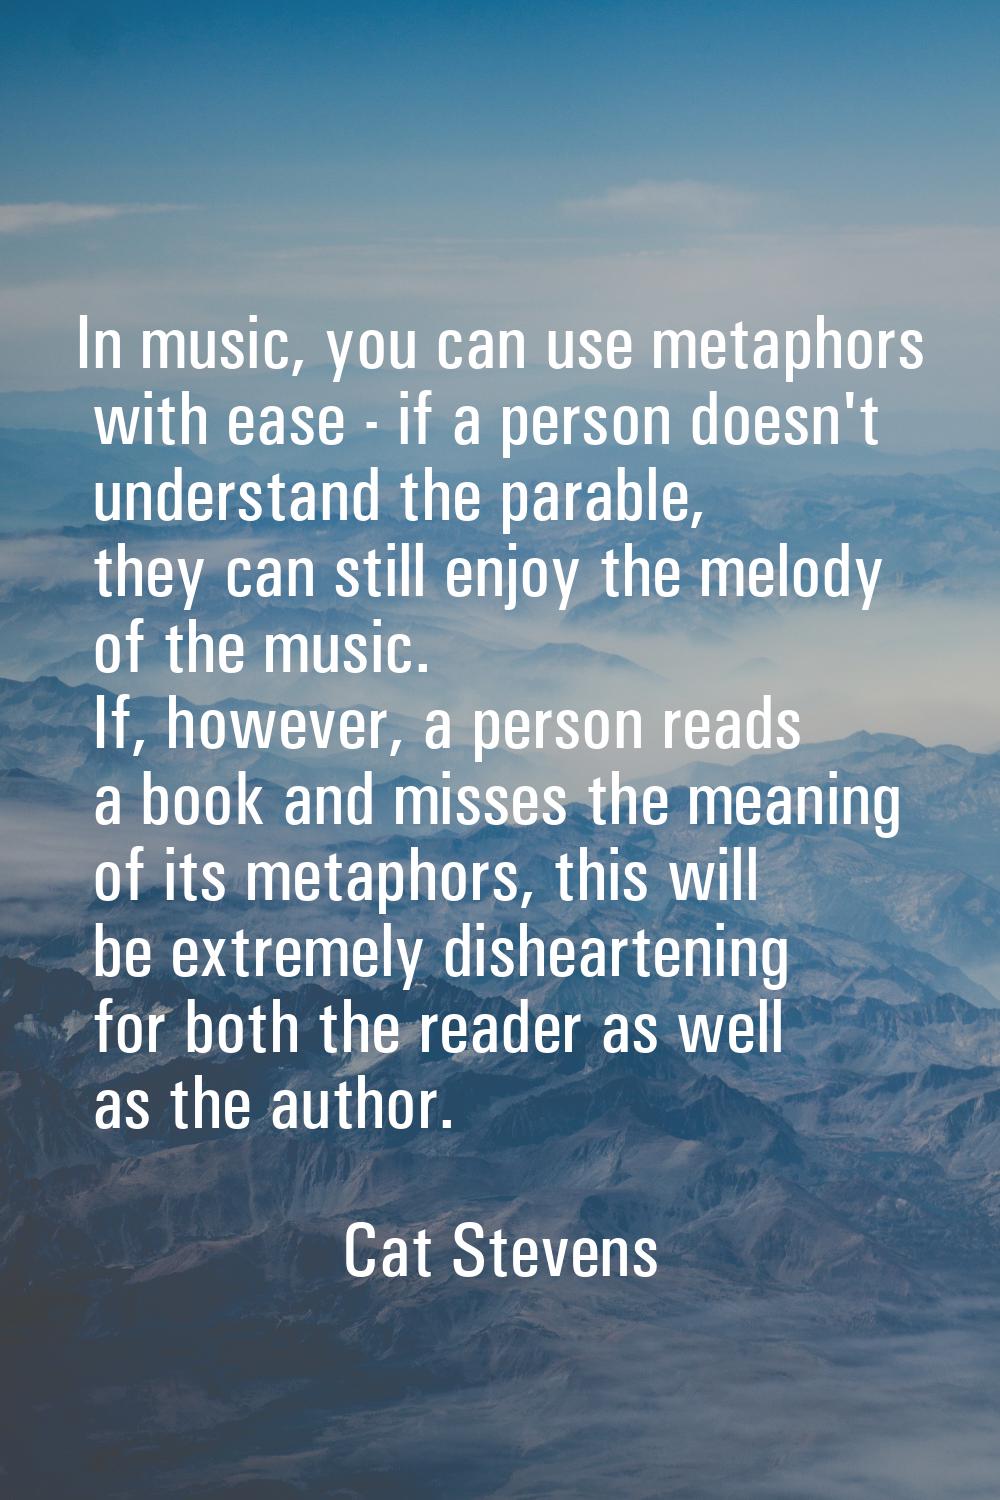 In music, you can use metaphors with ease - if a person doesn't understand the parable, they can st